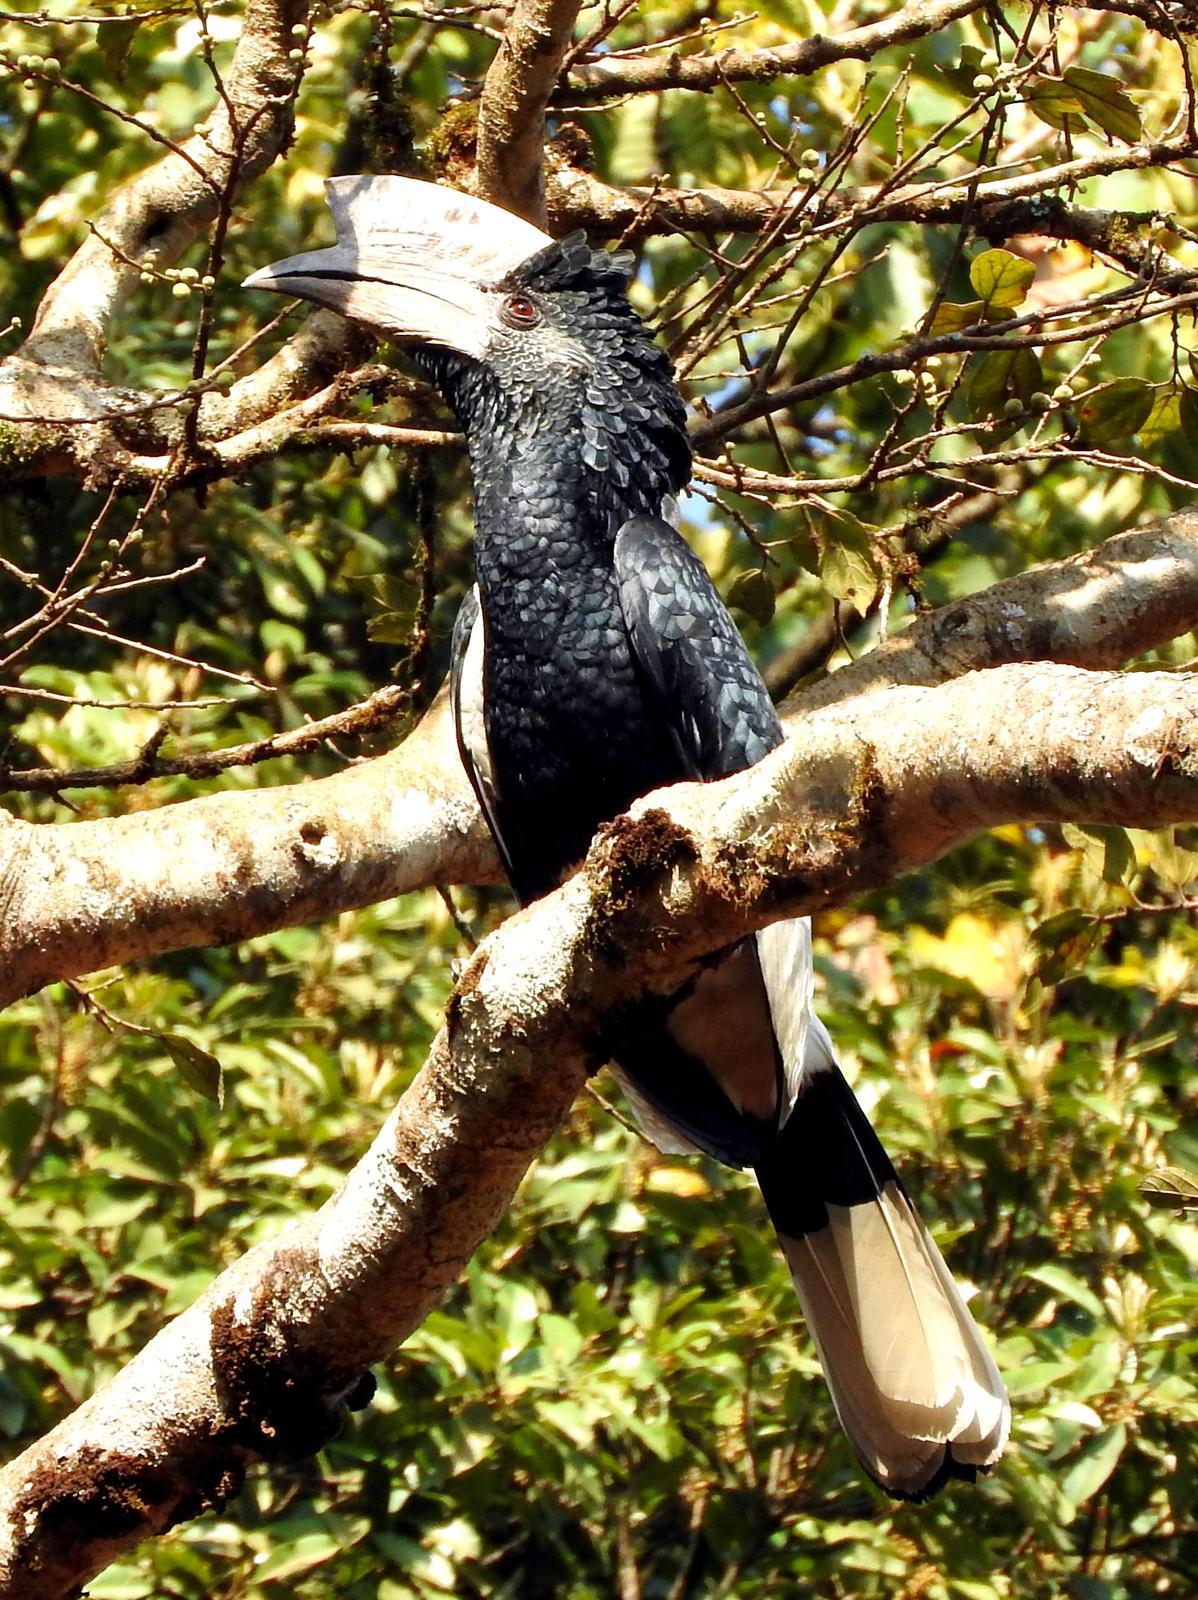 Black-and-white-casqued Hornbill Photo by Todd A. Watkins